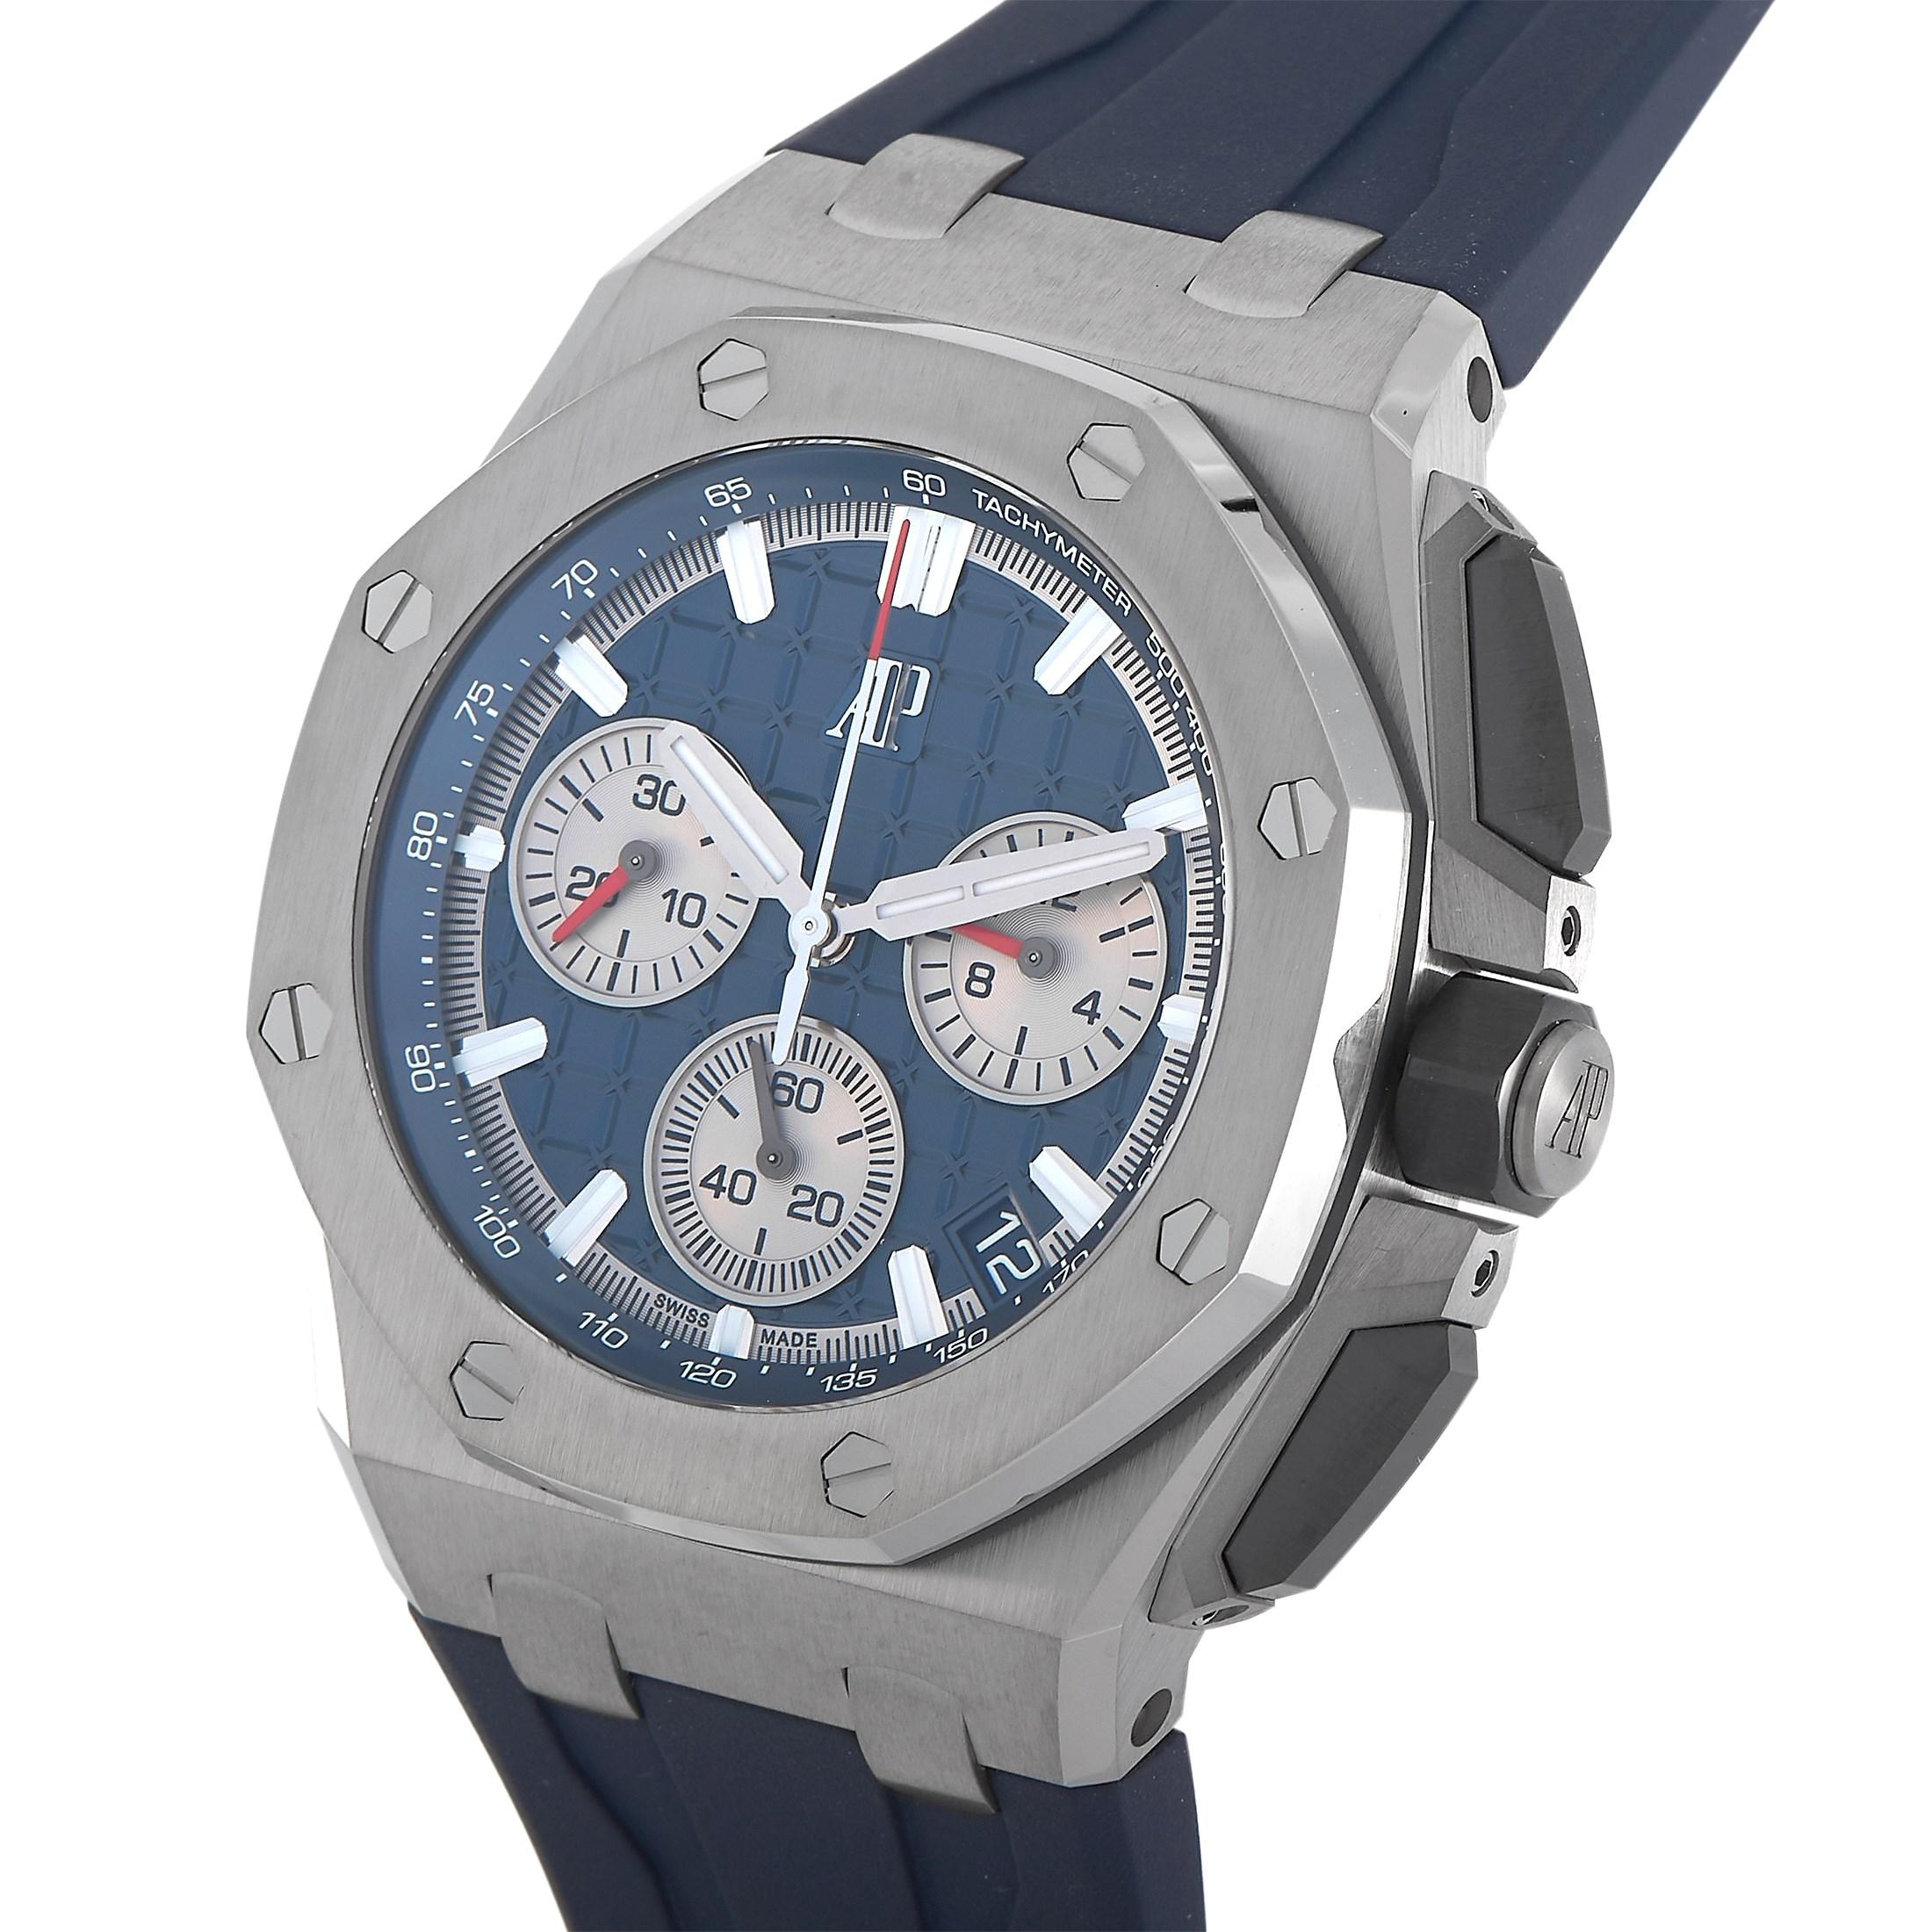 The Audemars Piguet Royal Oak Offshore Watch, reference number 26420TI.OO.A027CA.01, is a functional timepiece with a distinct sense of style. 

Bold and commanding in design, it features a 43mm titanium case and screw-accented bezel attached to a